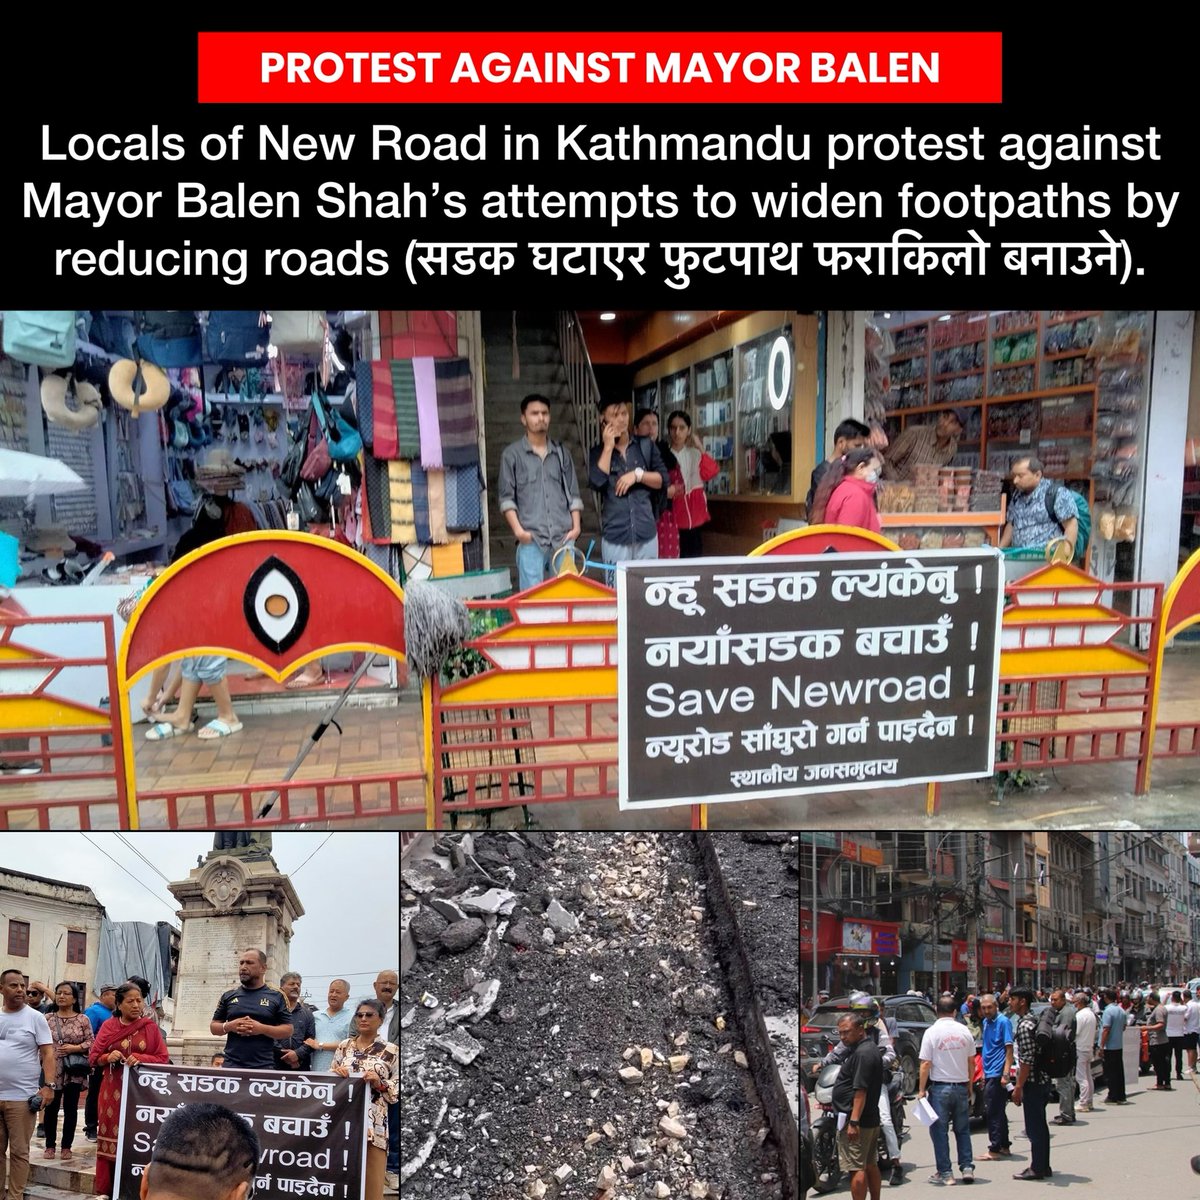 The locals of New Road in Kathmandu have protested against Mayor Balen Shah for trying to widen the footpaths by reducing the roads. The residents of New Road formed a human chain from the New Road gate and protested against Mayor Balen with black banners. Thoughts?